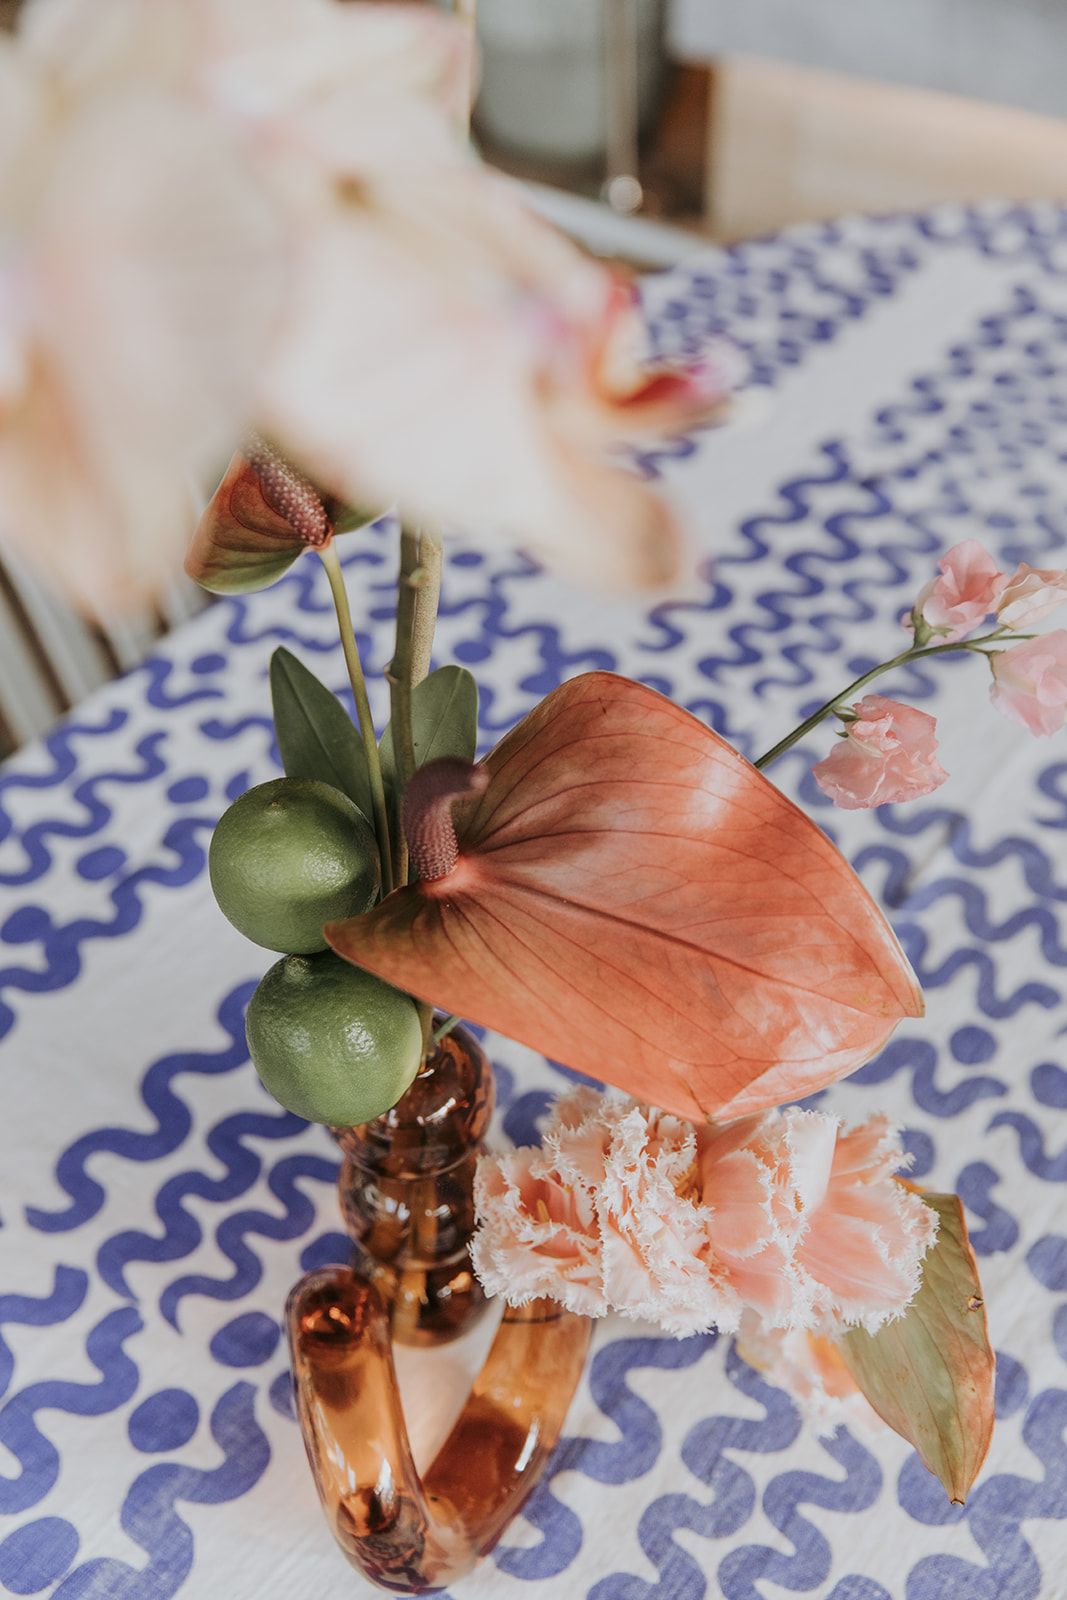 A close up photo of a flower holder and pink flowers with limes and lillys. The table has blue and white patterns